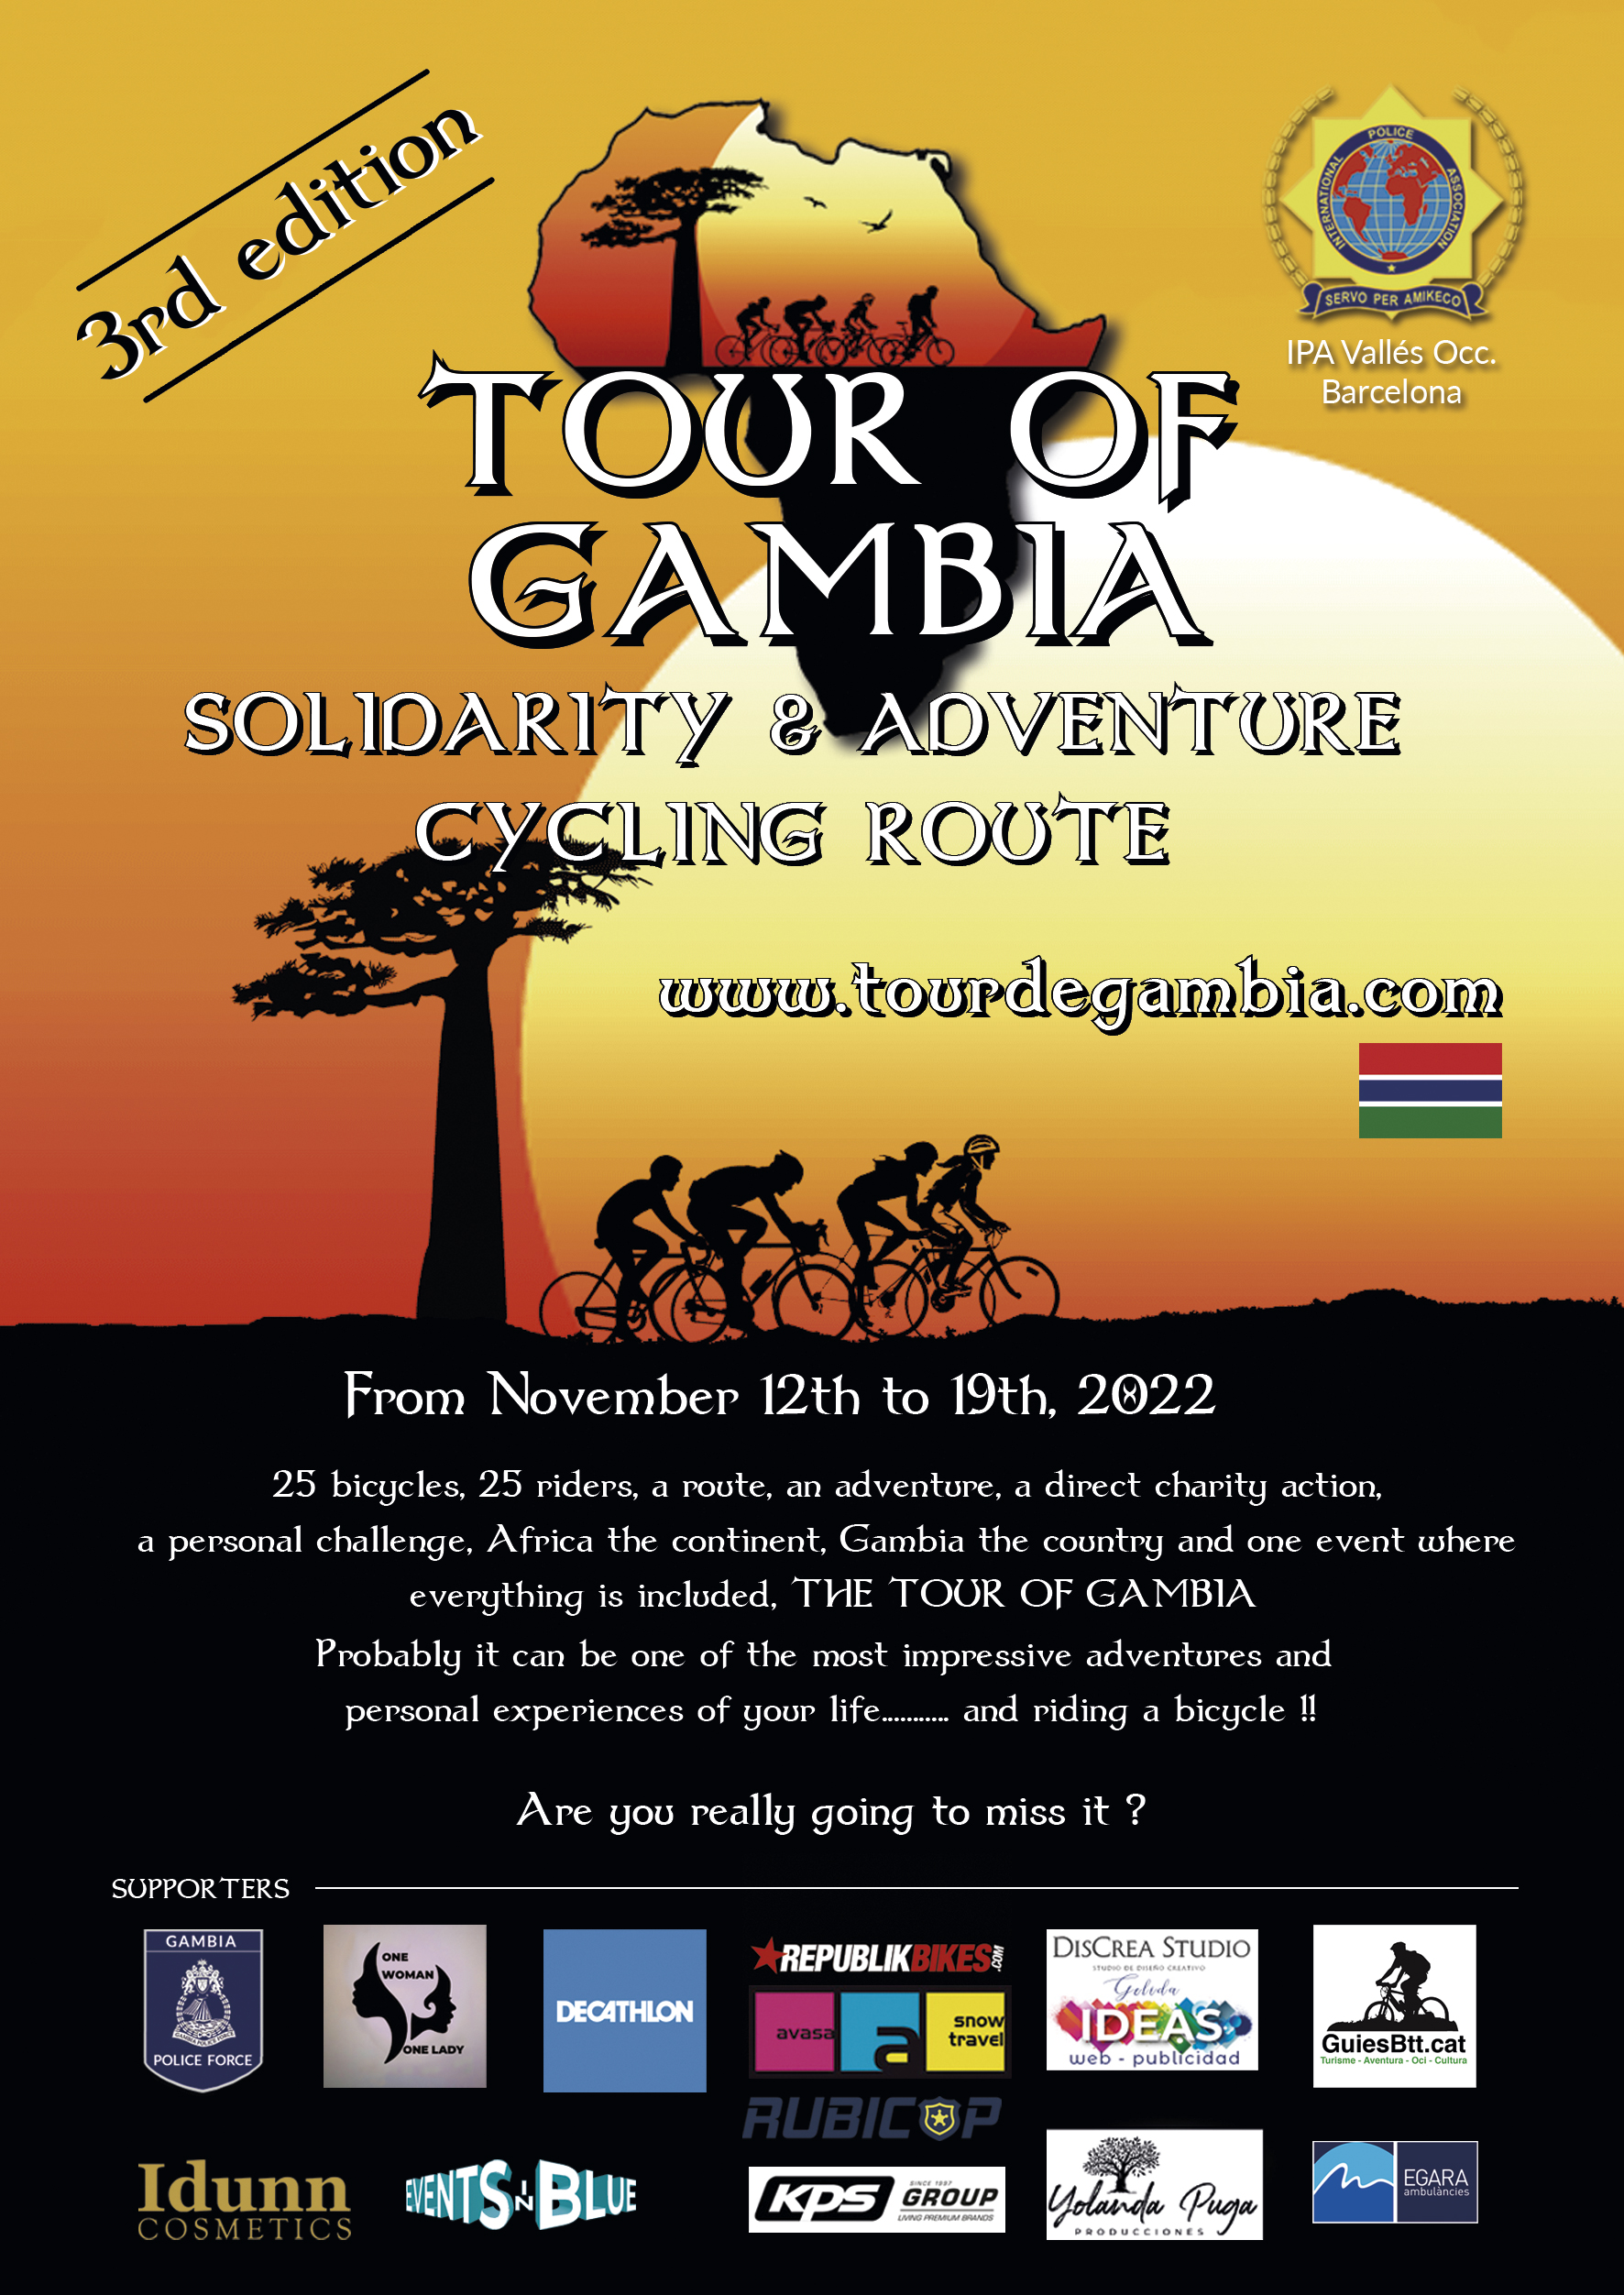 TOUR OF THE GAMBIA IPA 2022